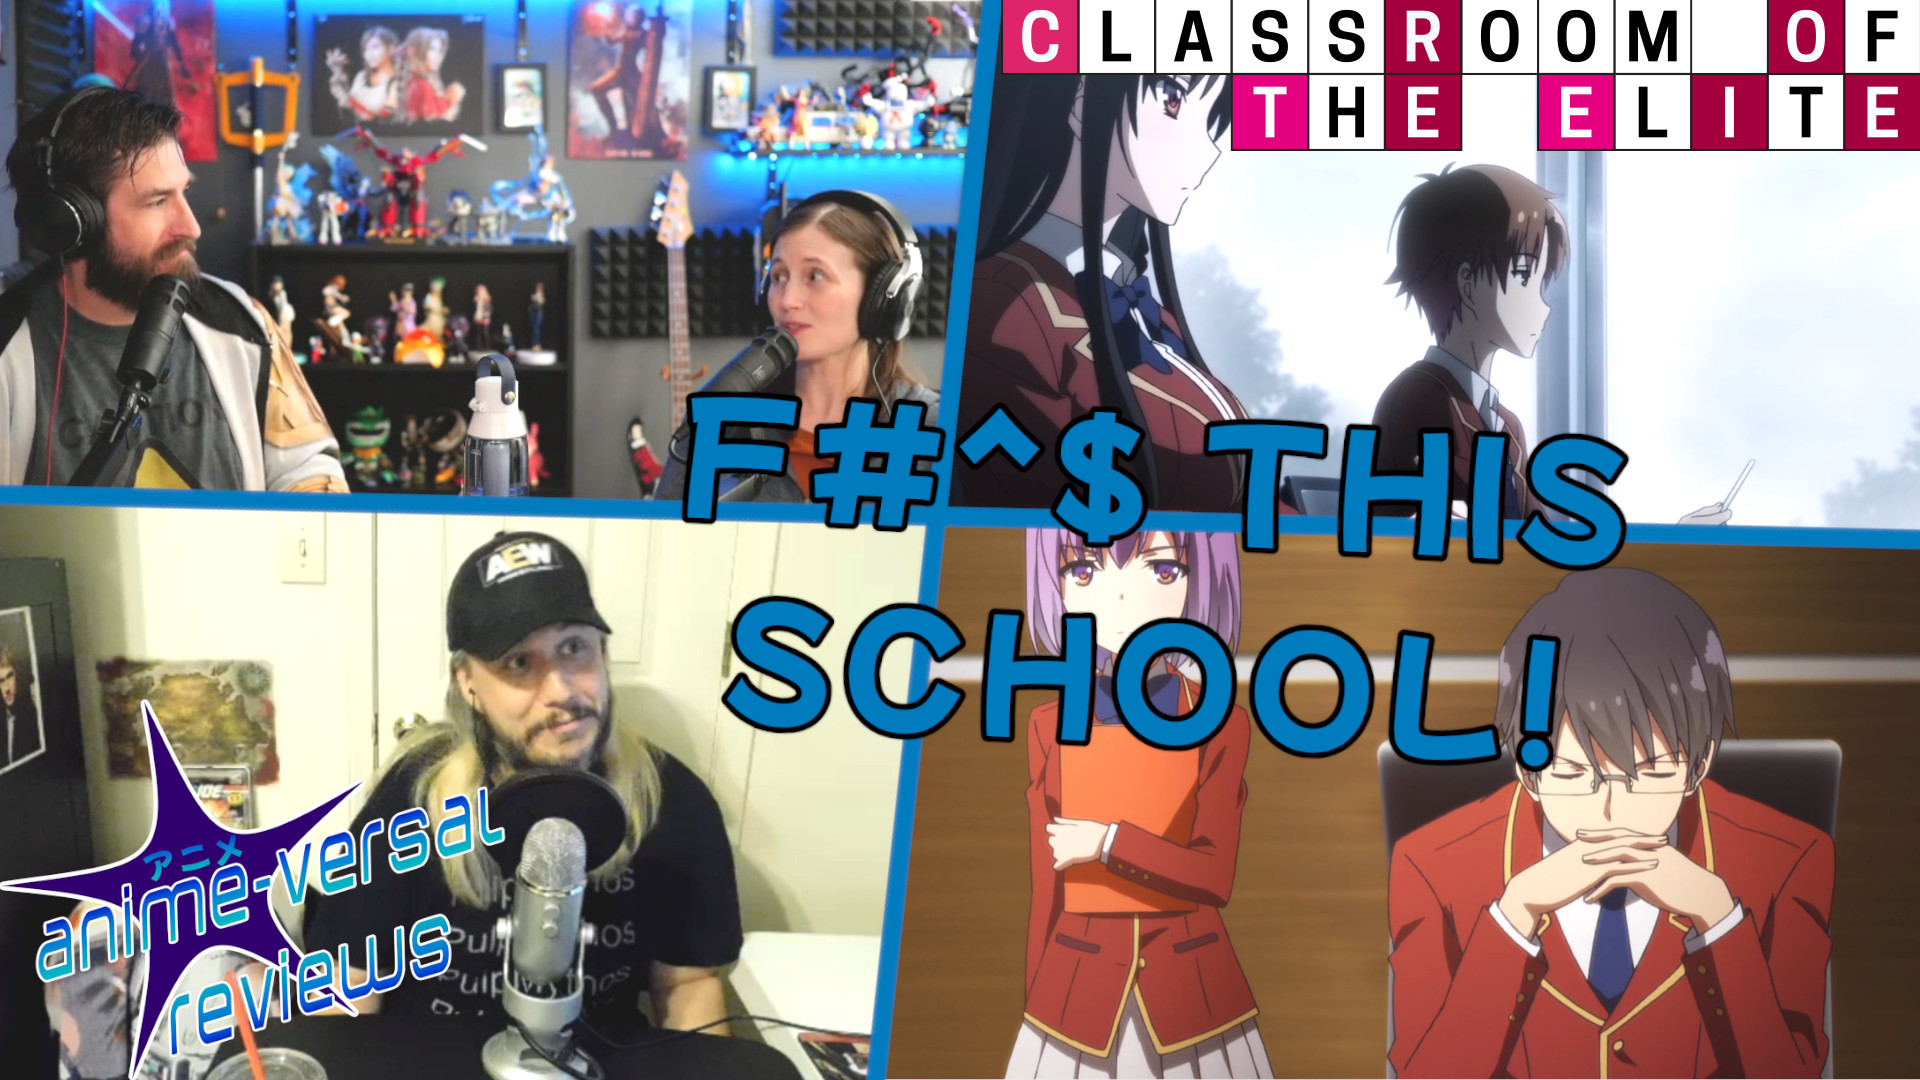 Classroom of the Elite Season 1 Review- High School Is Hell | AVR